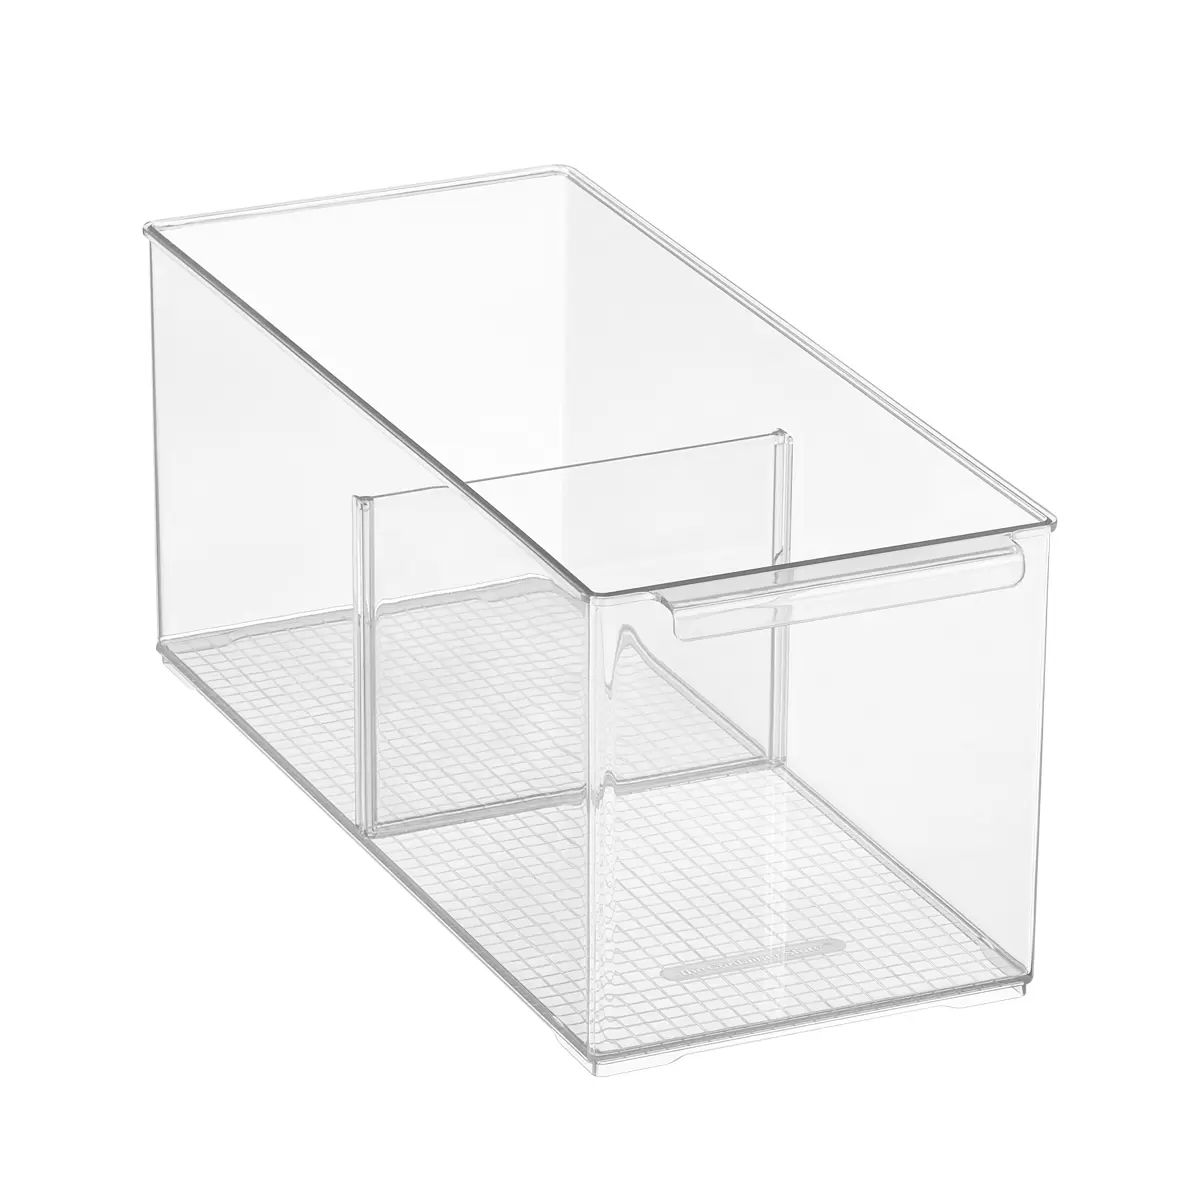 Shelf-Depth Pantry Bin with Divider | The Container Store